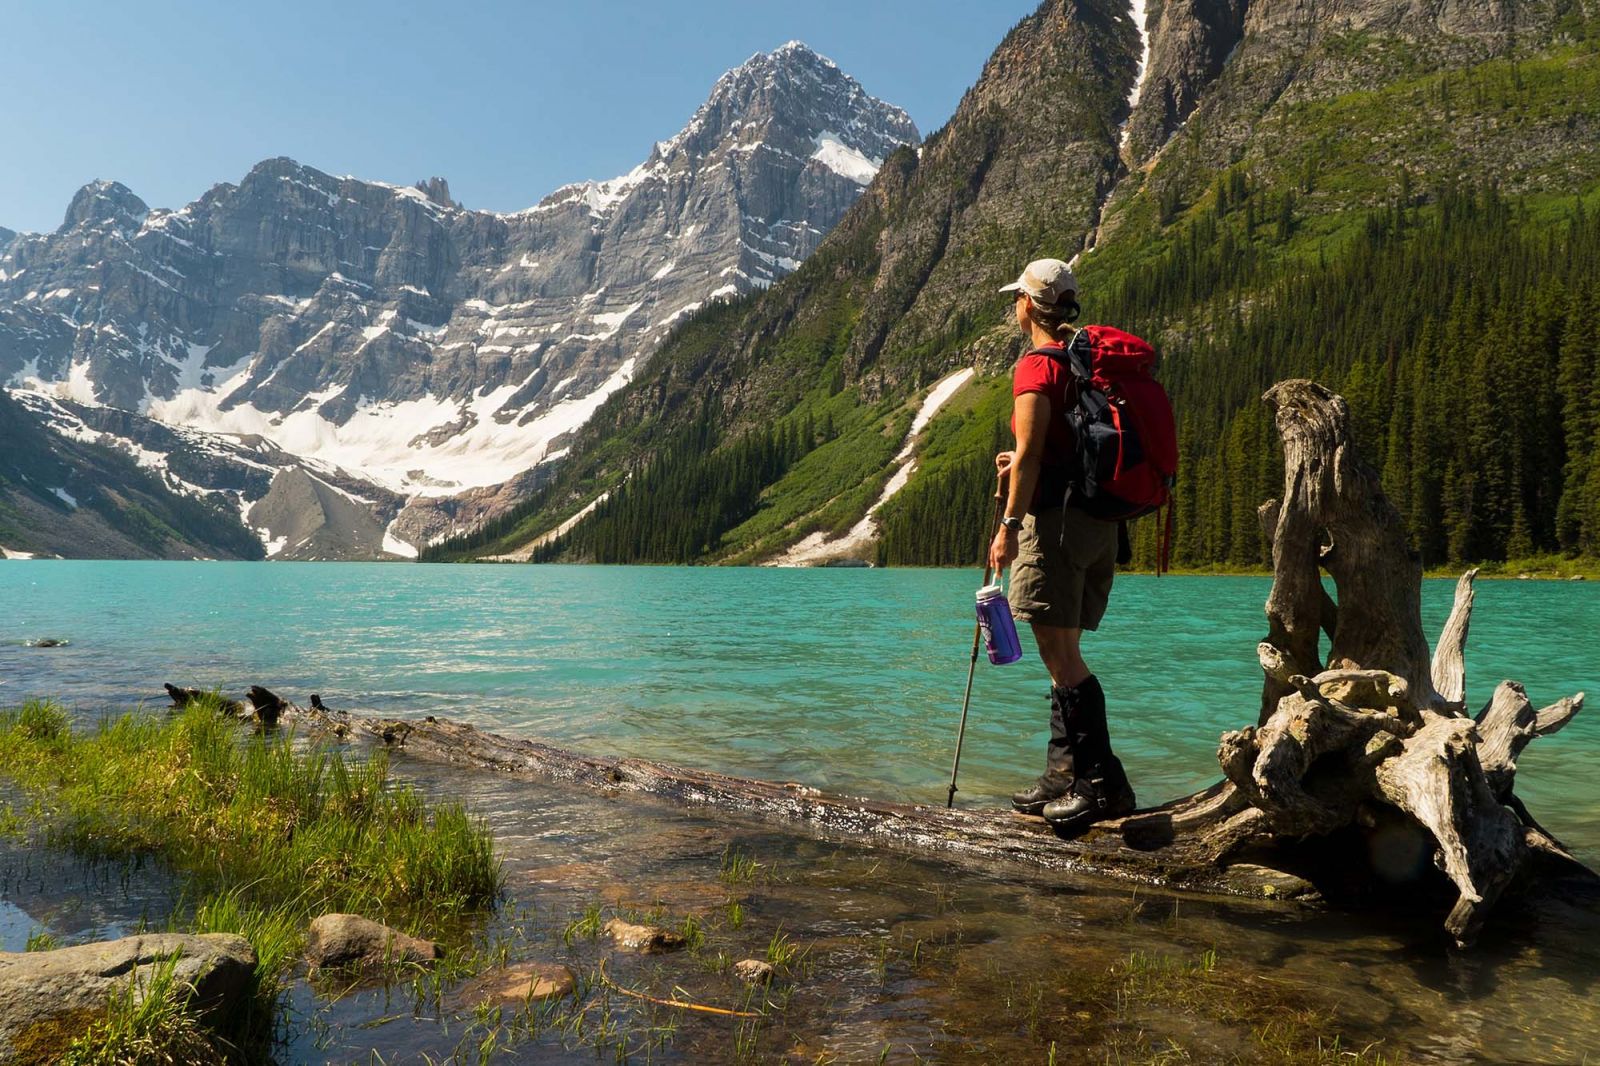 A hiker stands beside the turquoise water and looks out at the Mountains.